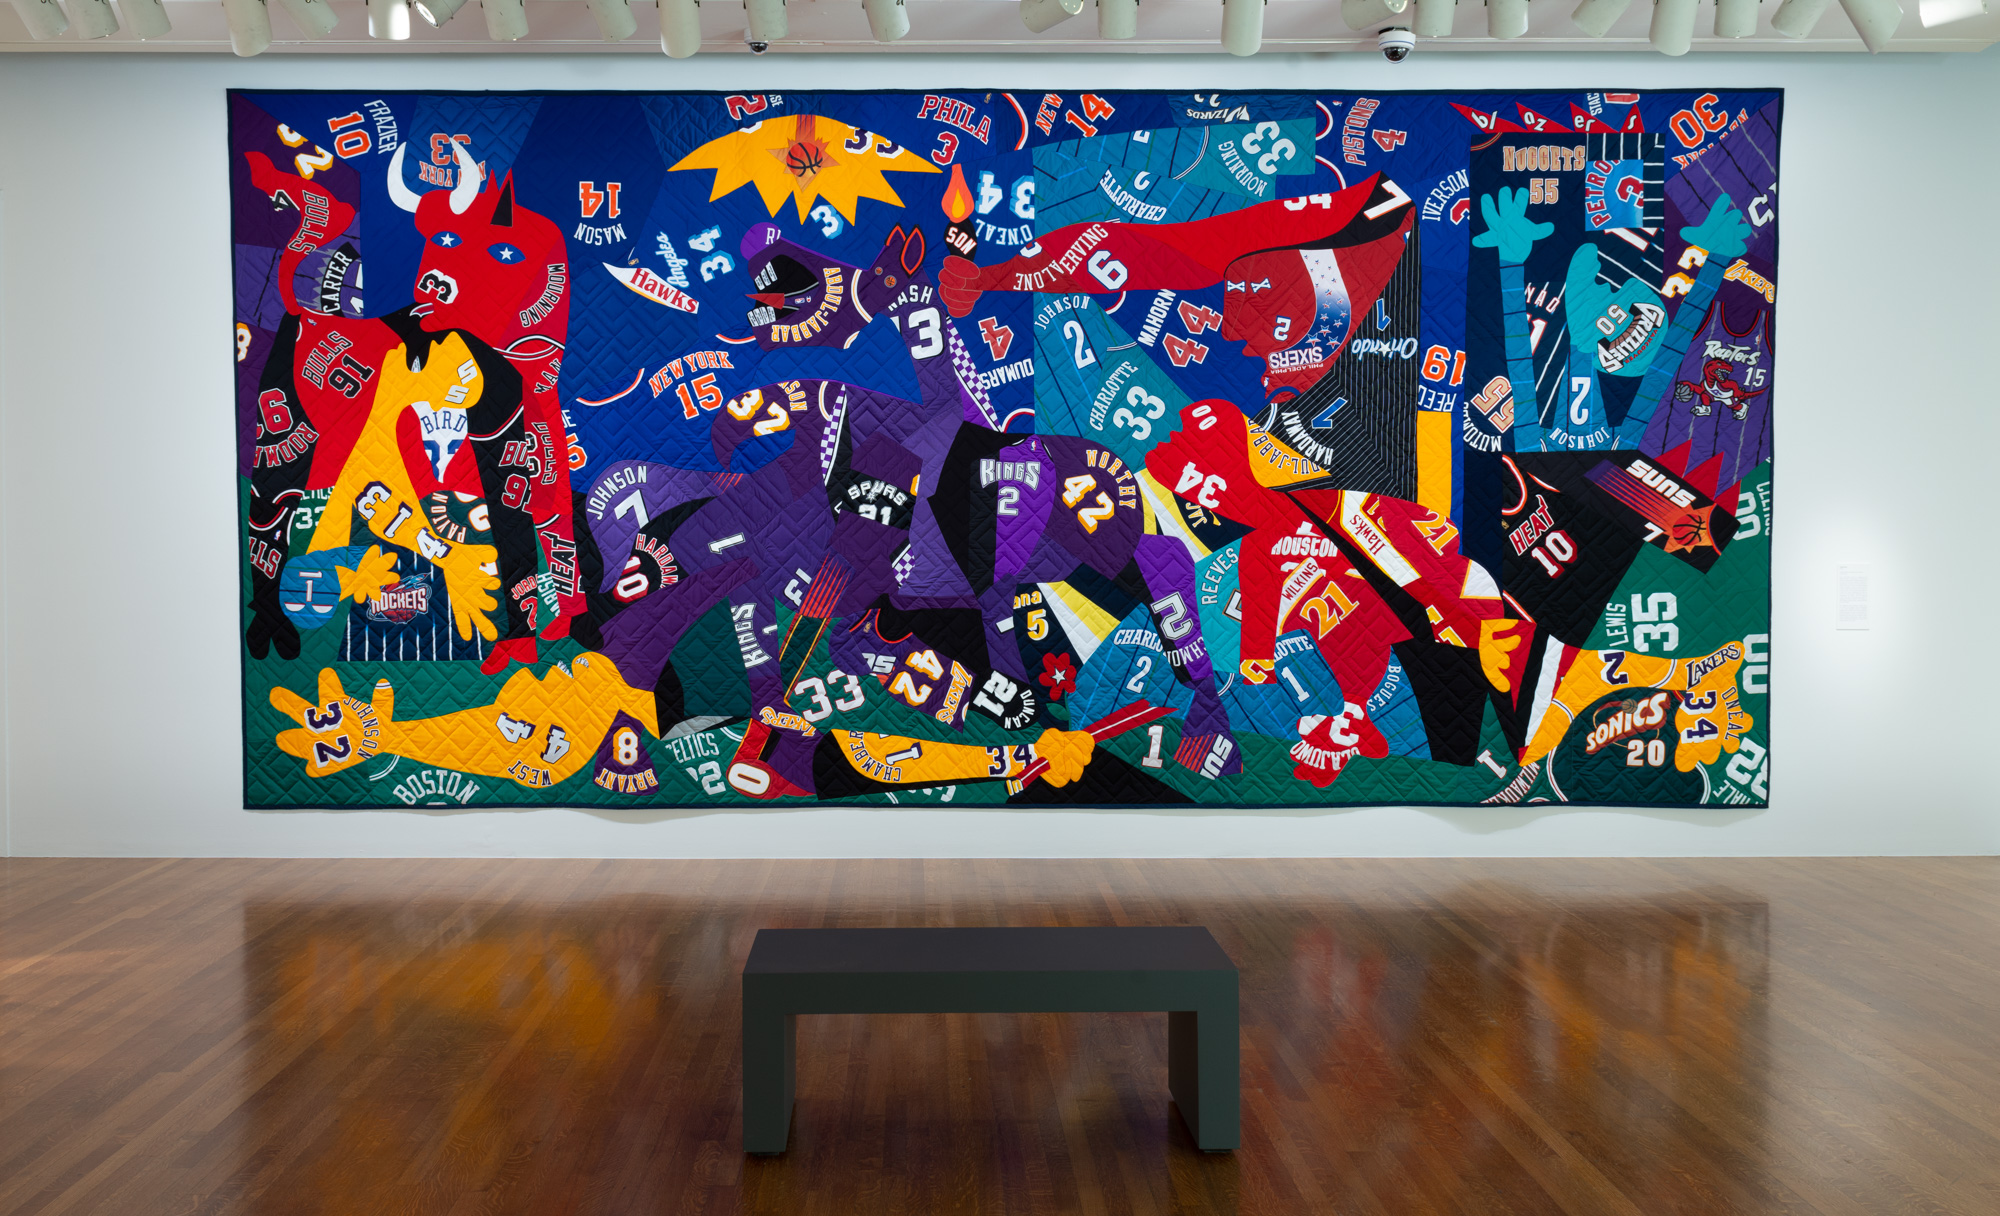 Hank Willis Thomas' Guernica, a remake of the Pablo Picasso painting of the same name, using various sports jerseys cut into the forms and shapes, and fashioned into a quilt